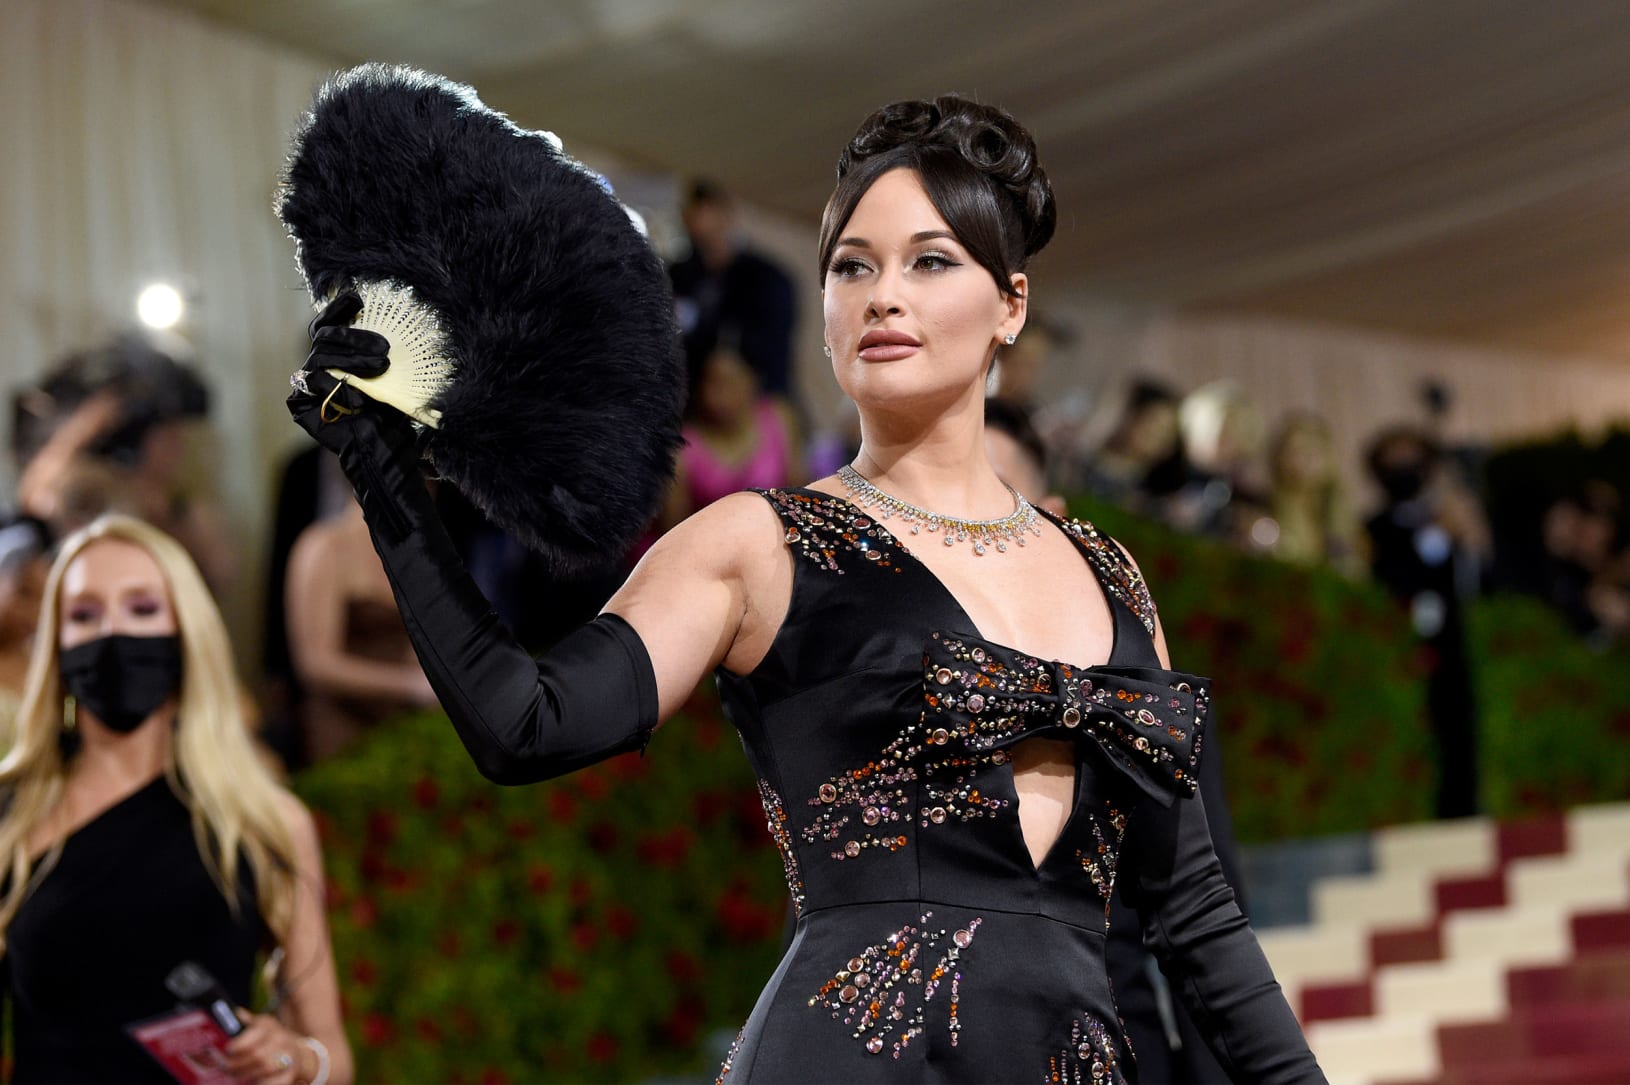 Musician Kacey Musgraves arrived with an oversized feathered fan, wearing an embellished low-cut black Prada dress with a front bow.